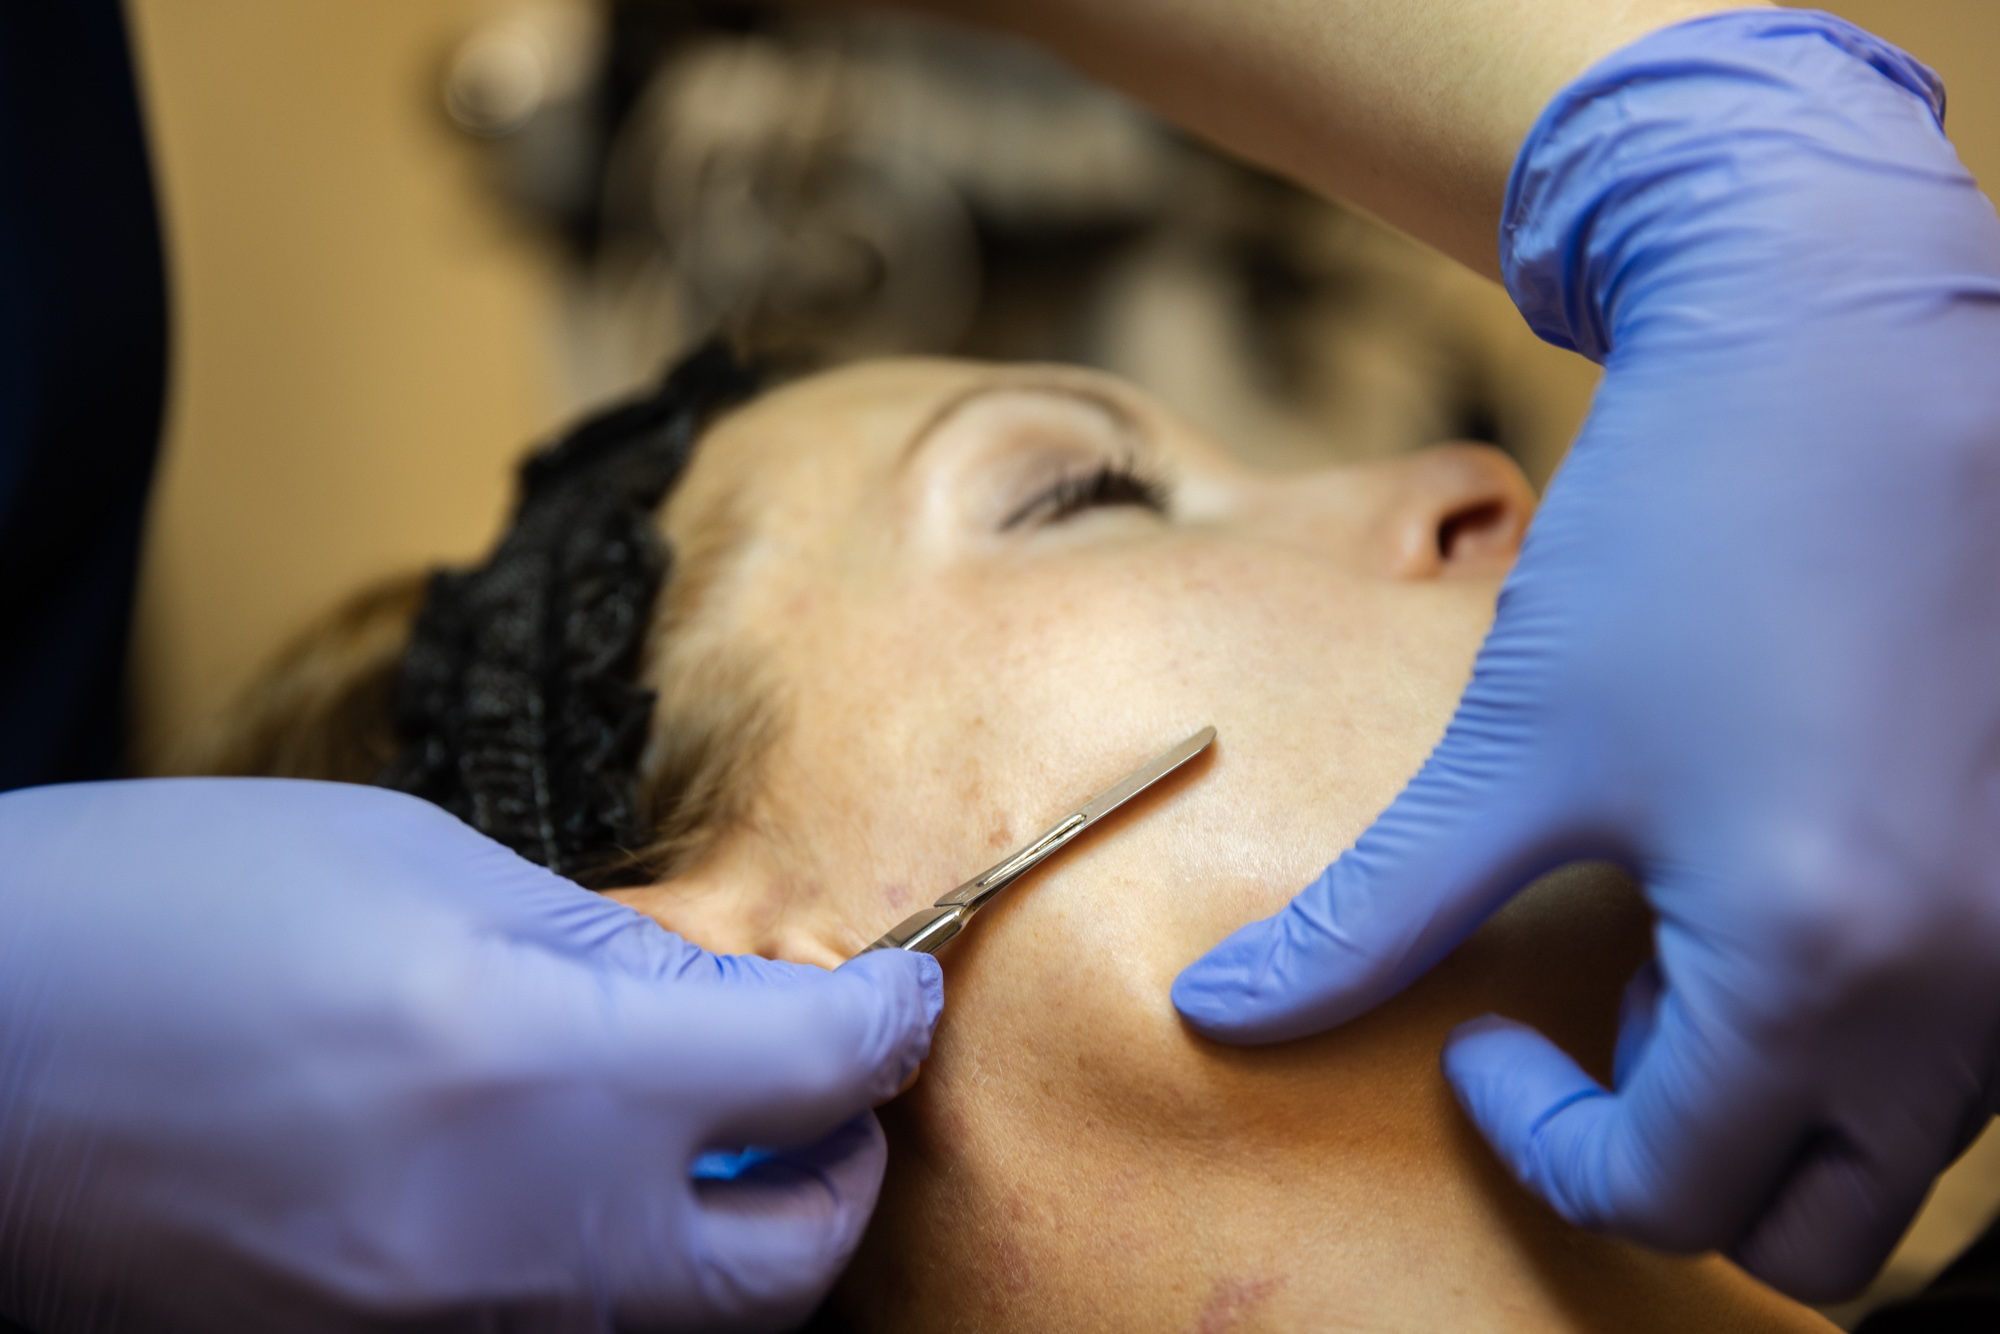 A close up of a specialized planar being used on a patient's face.